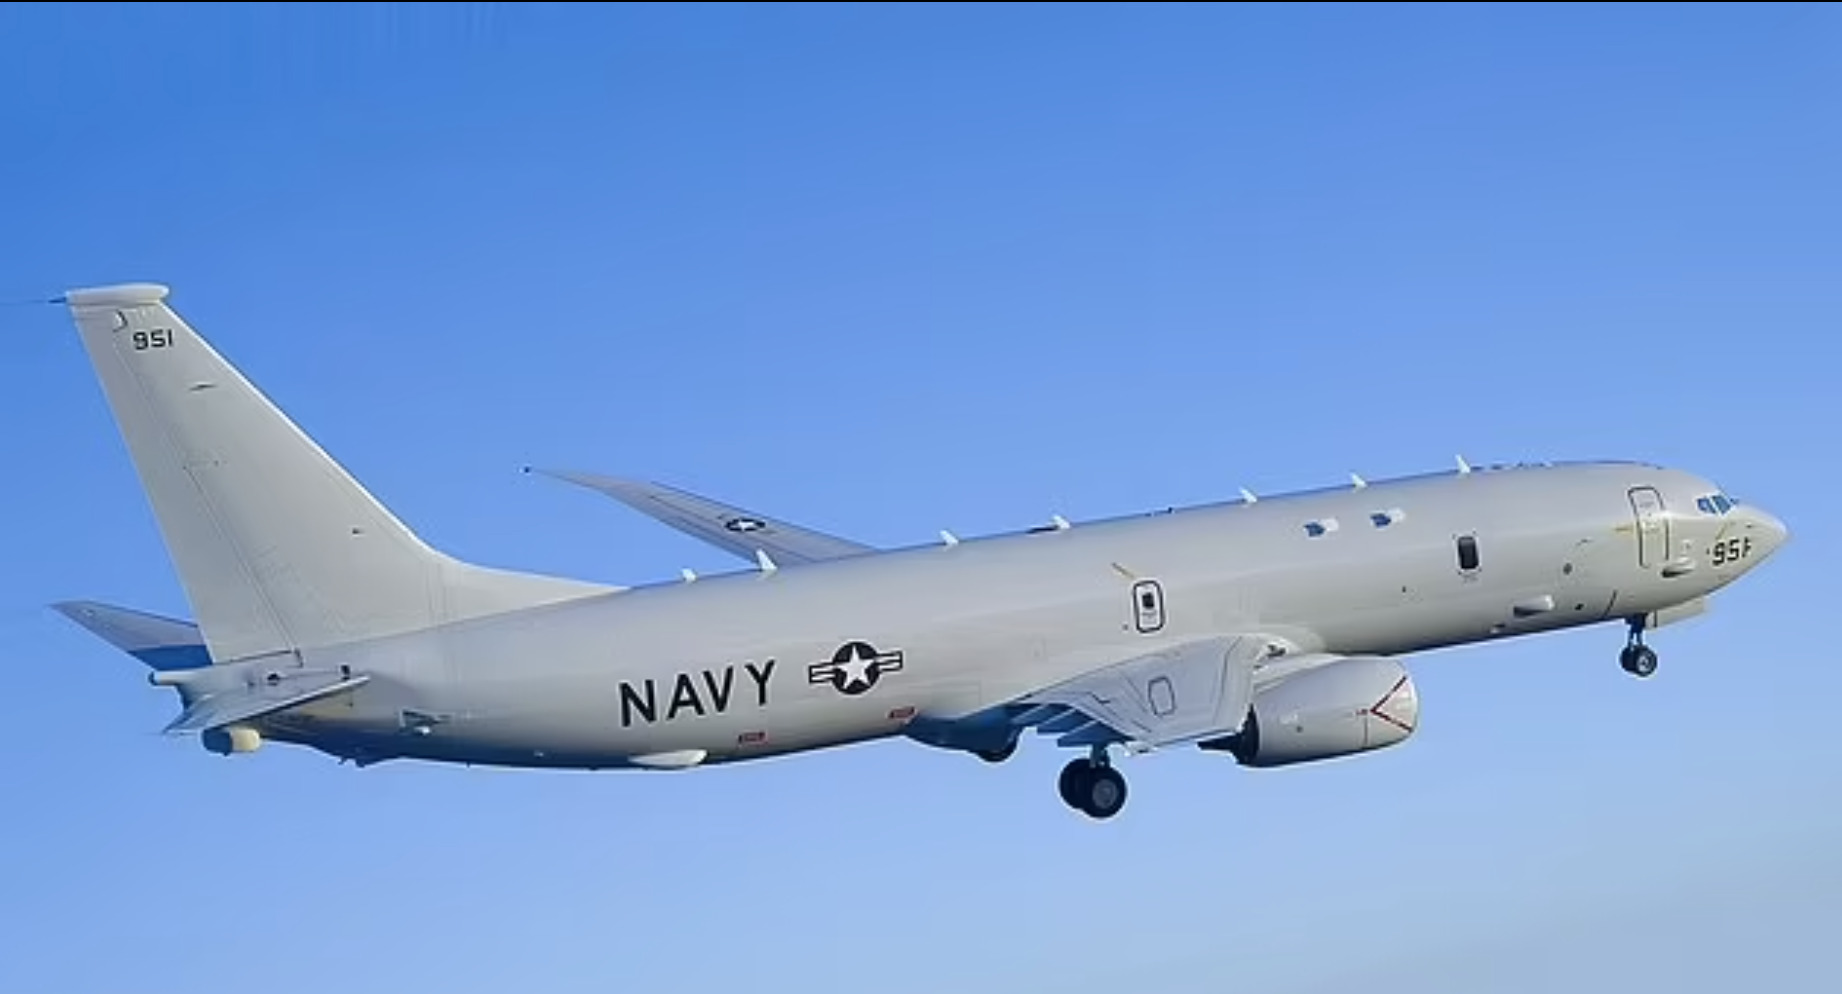 REVEALED: US maritime surveillance plane was over Black Sea minutes before Russian flagship Moskva was ‘hit by Ukrainian missiles’